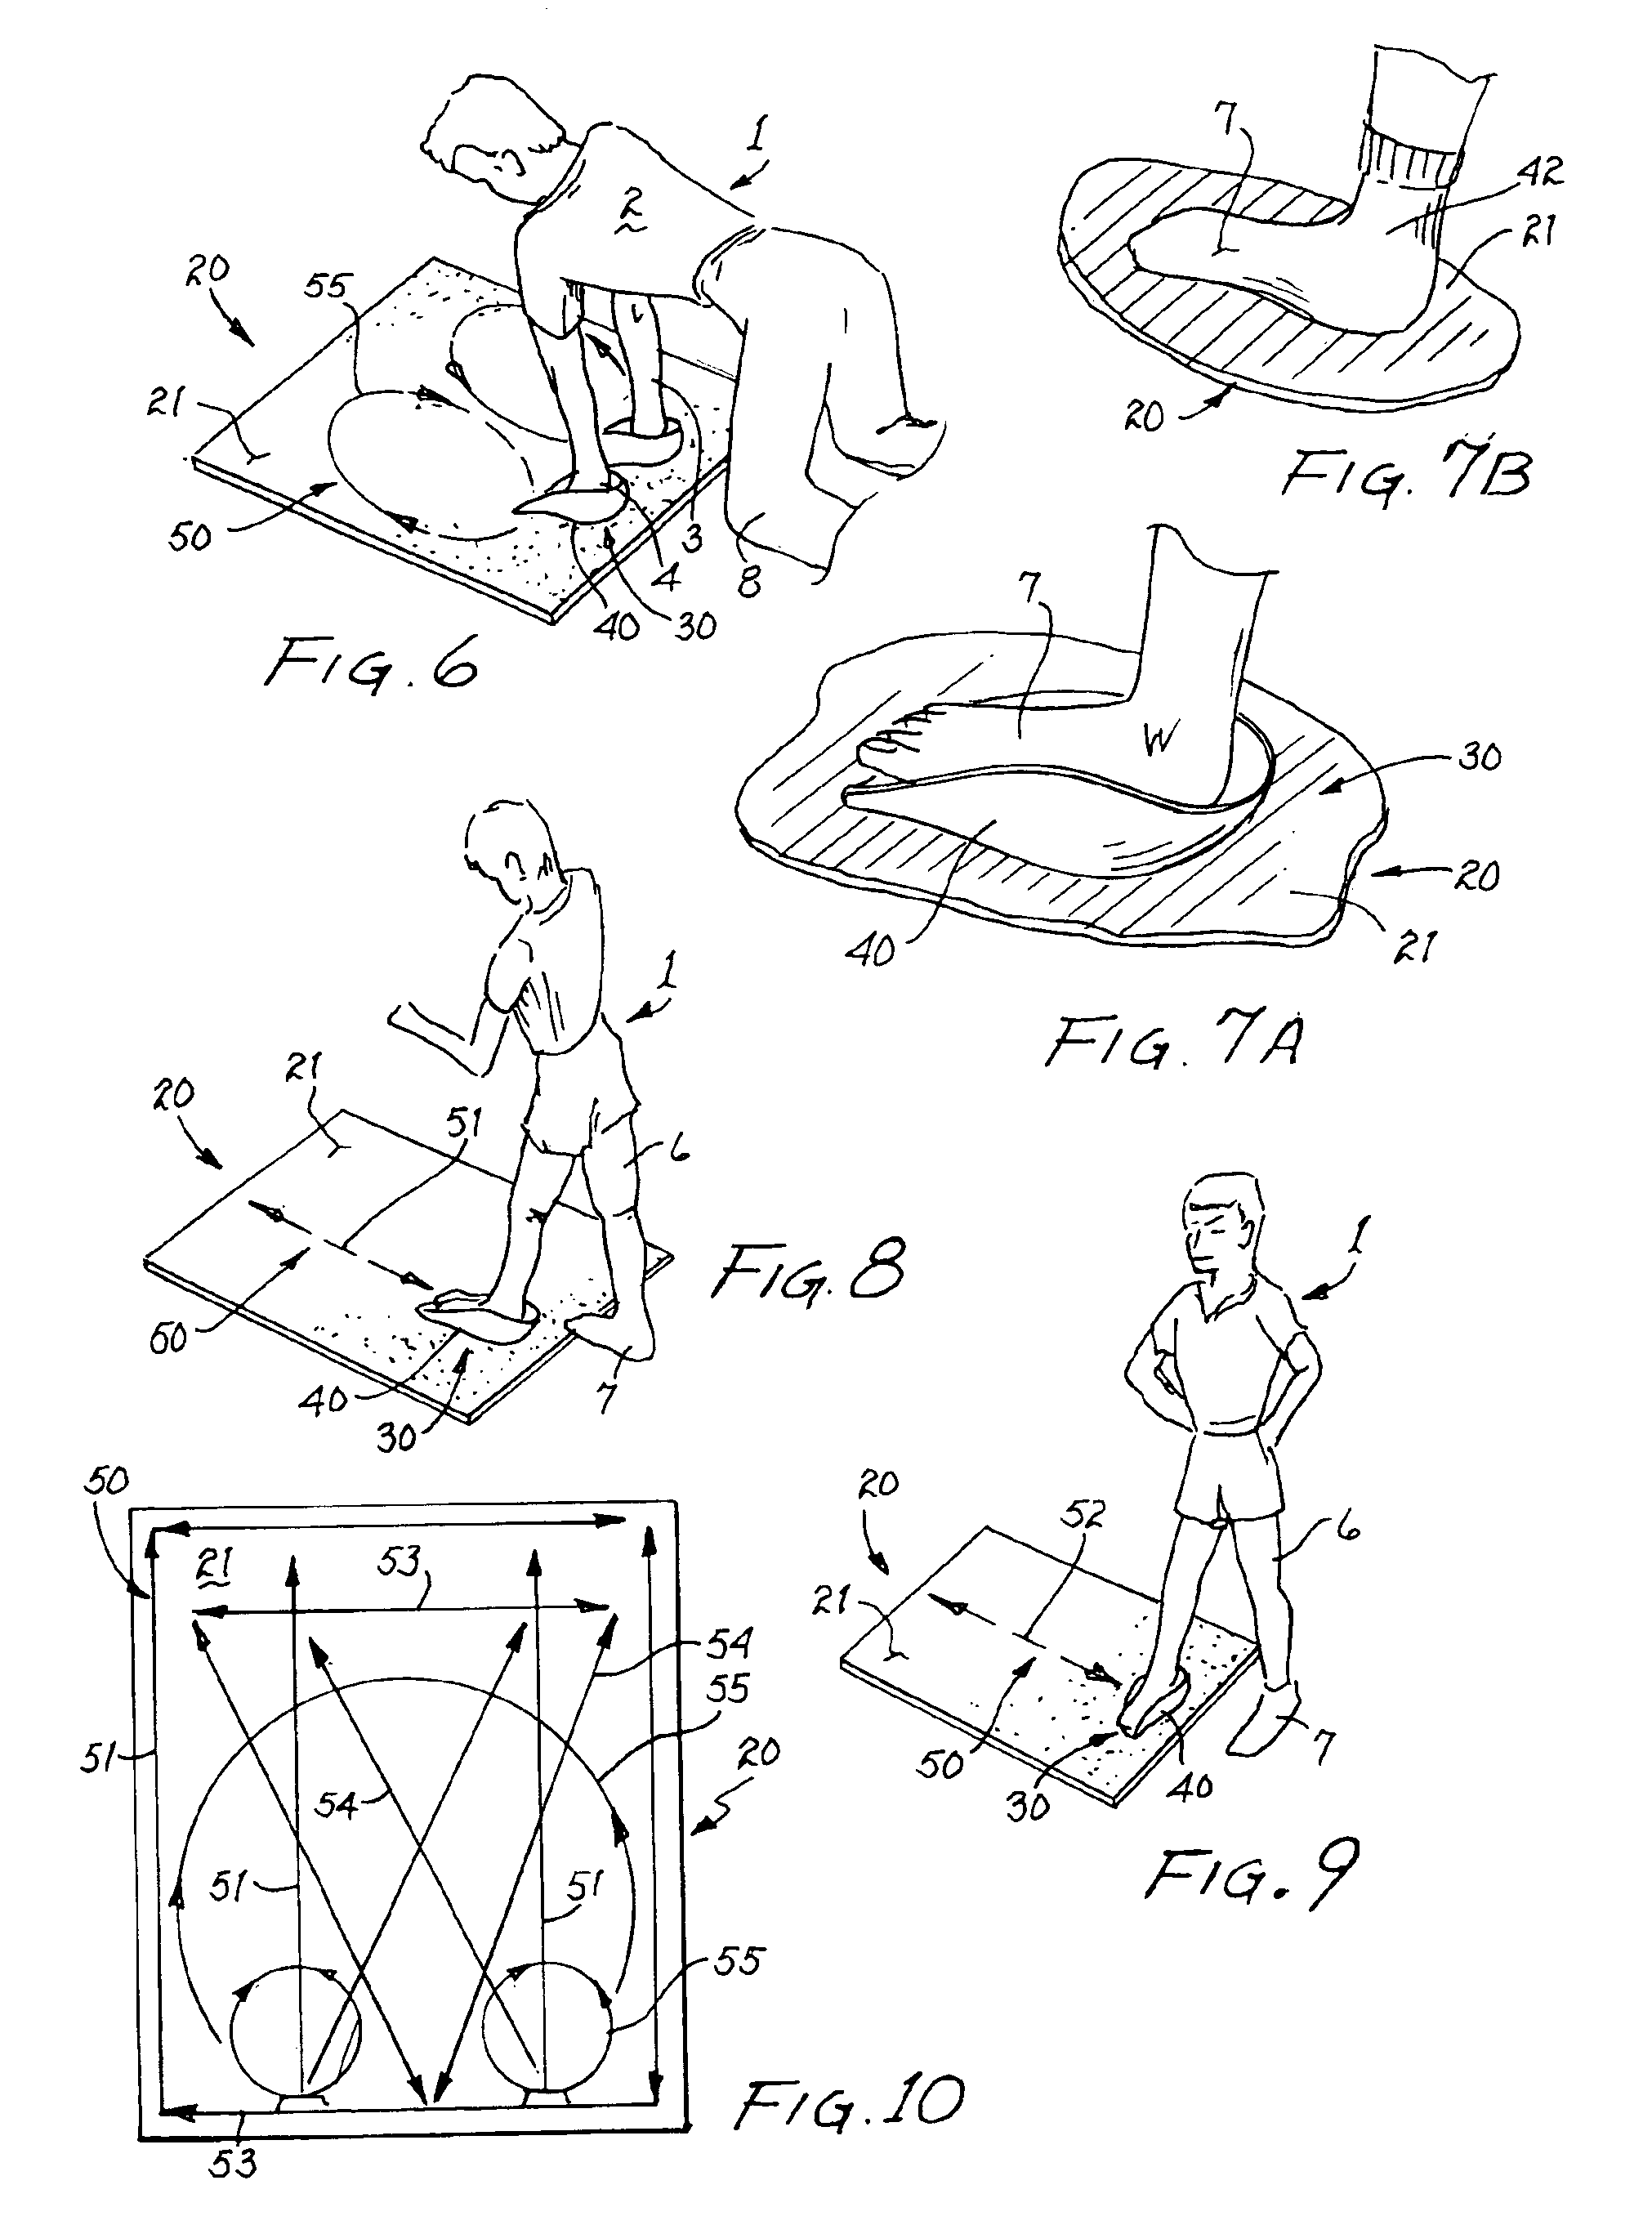 Exercise apparatus for recreational and rehabilitative exercise and method of exercise therefor